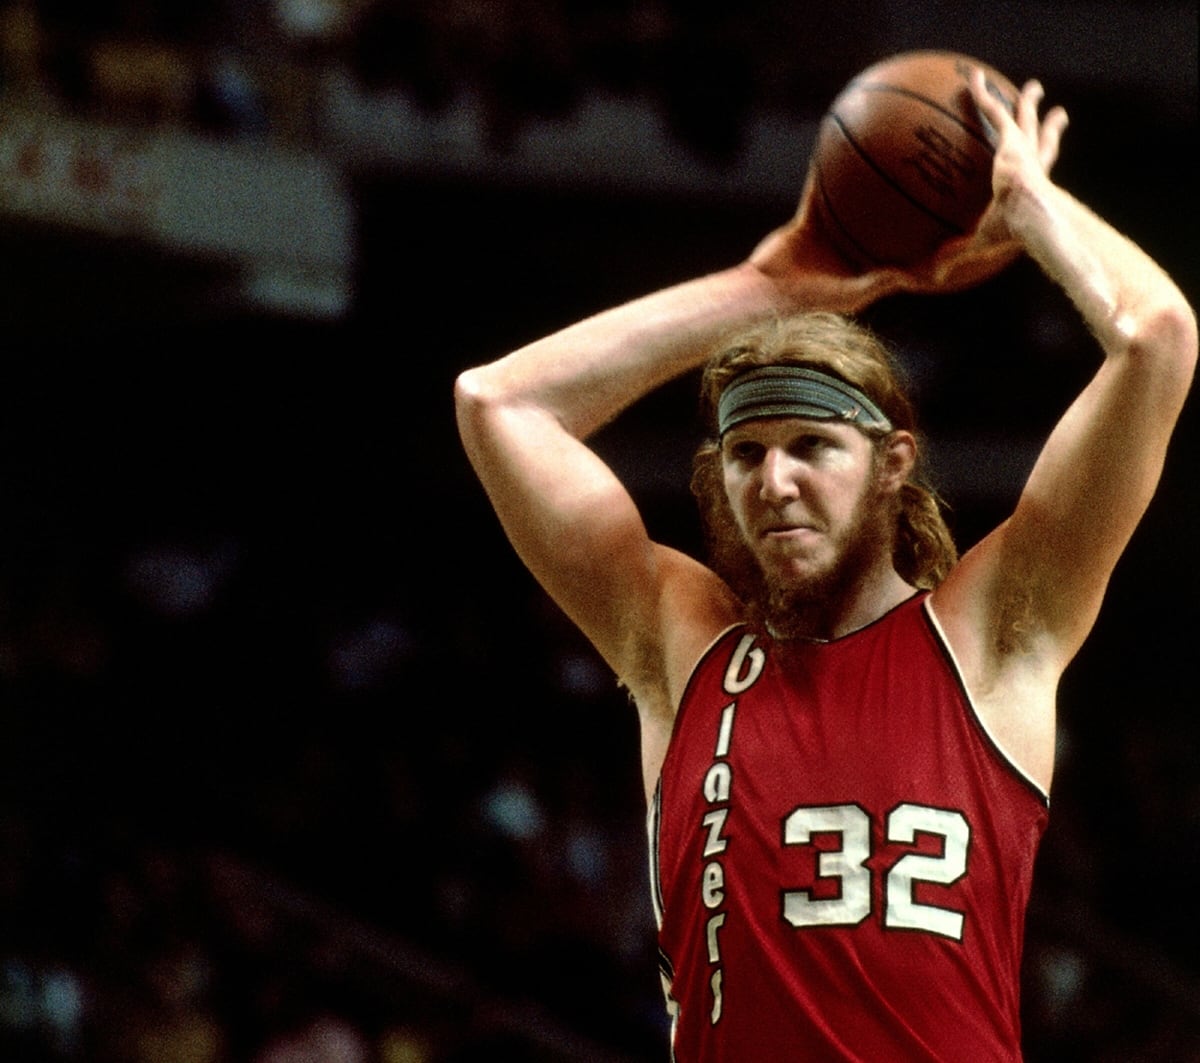 A New Book Imagines Blazers Legend Bill Walton as a Detective Solving a Kidnapping Between